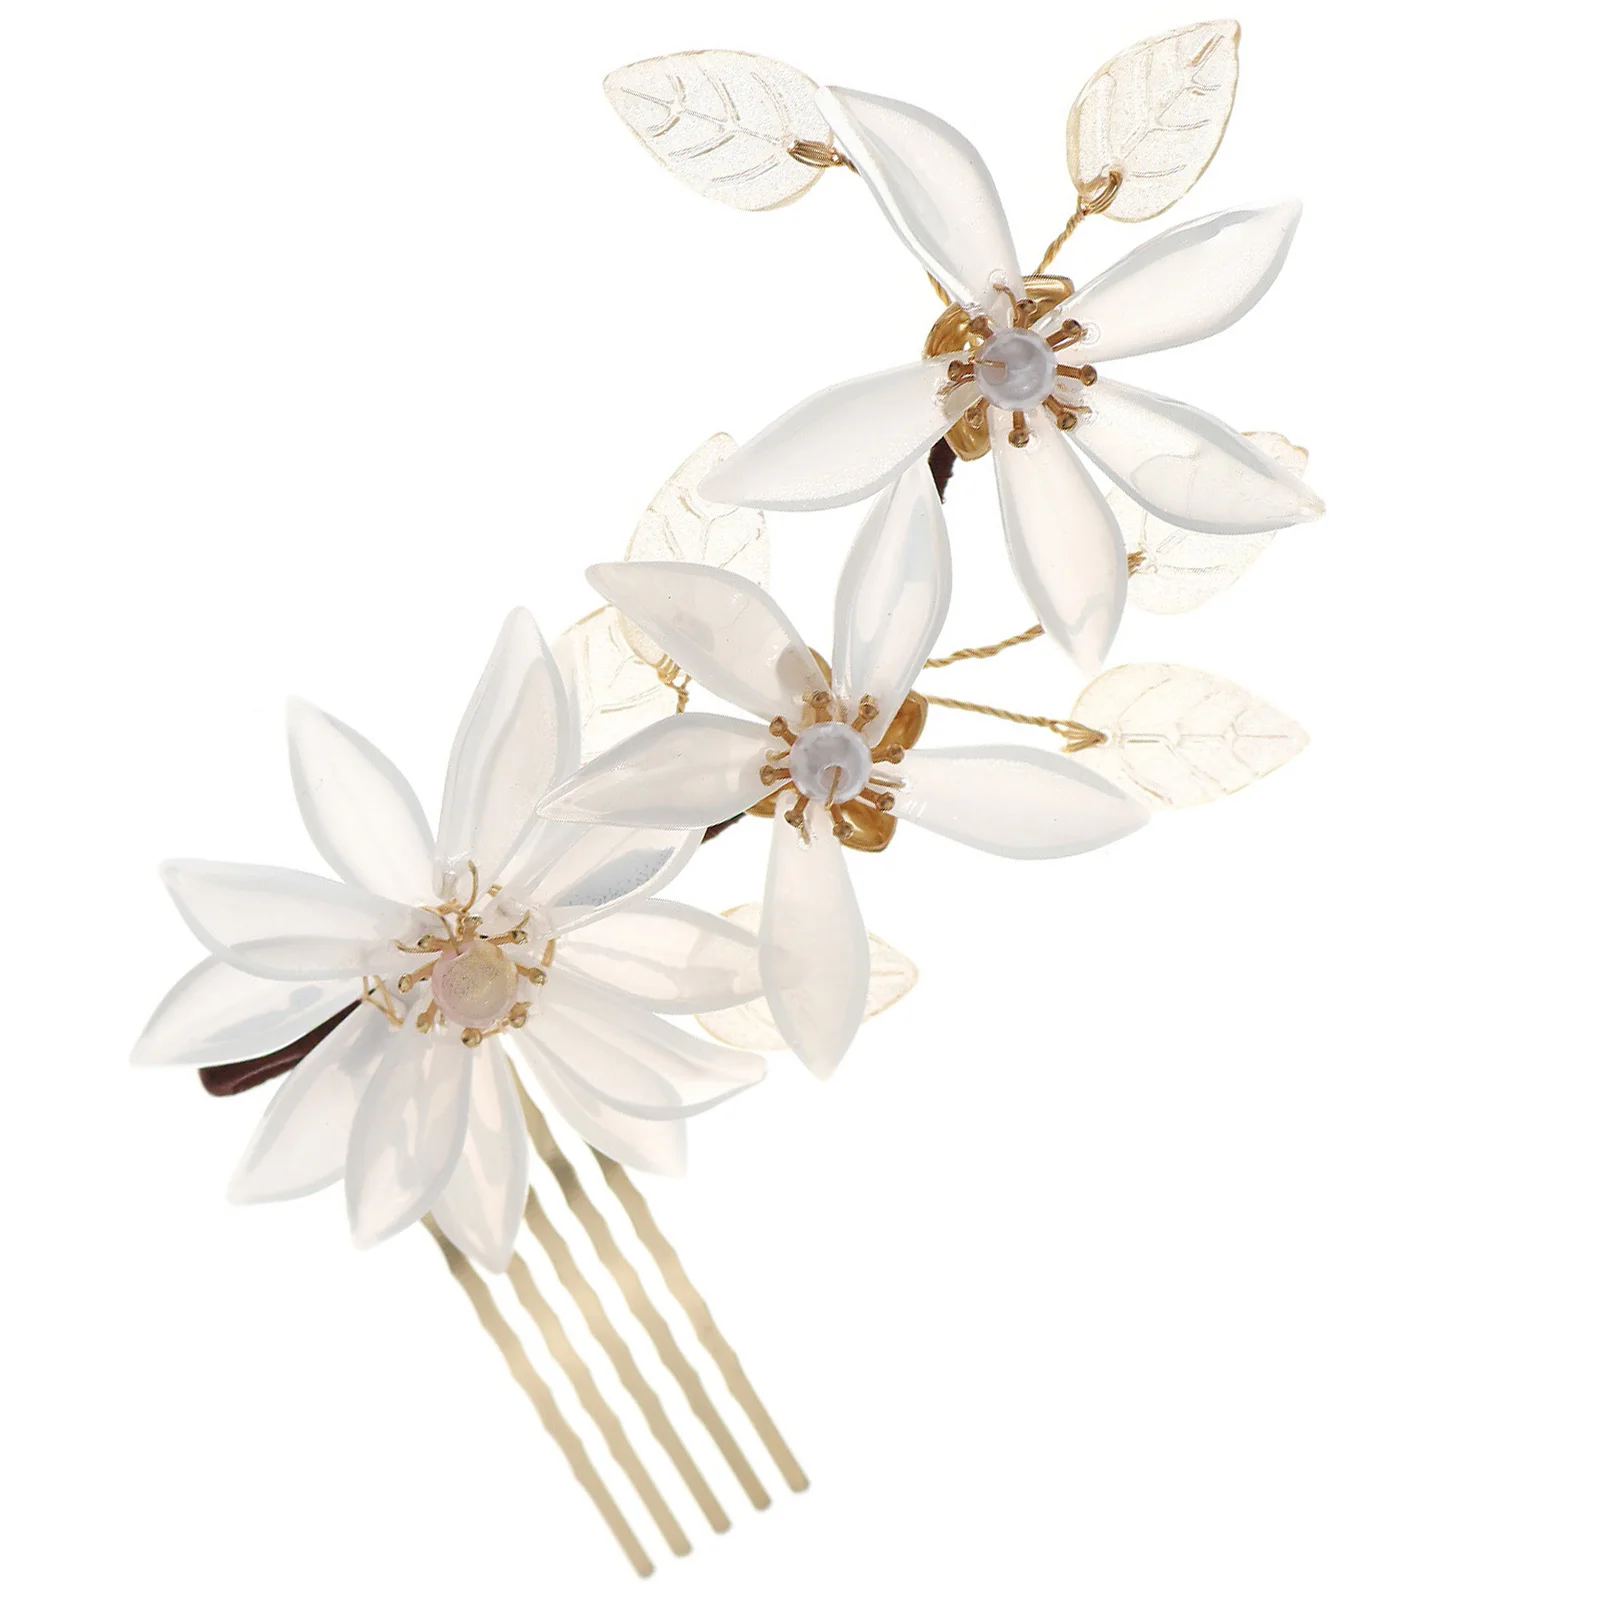 

Women's Hair Comb Headpiece Glittering Floral Hair Styling Tool Accessories for Female Daily Headdress Jewelries